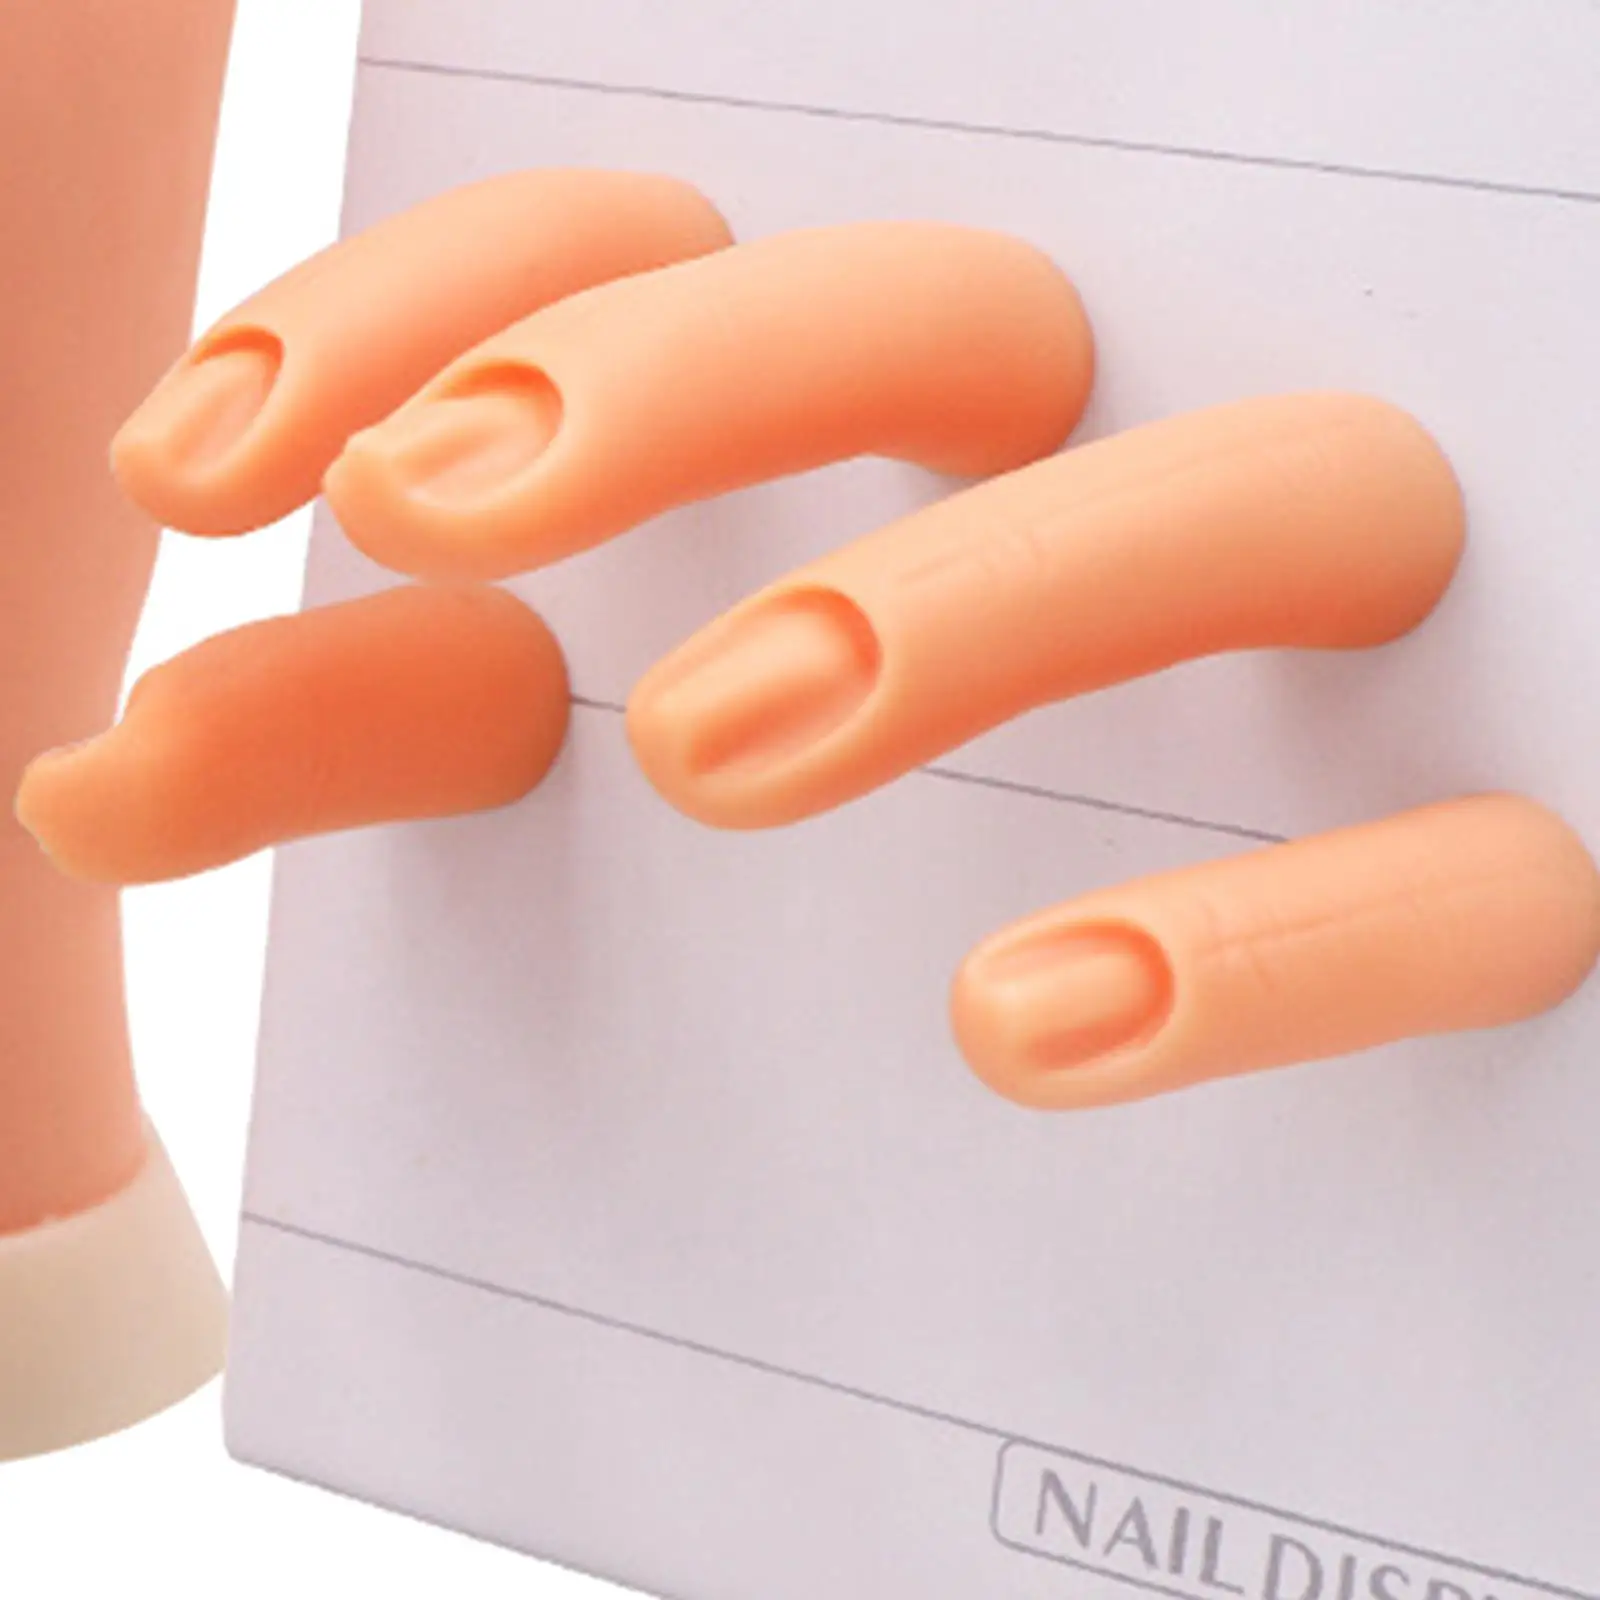  Training Tool Reusable Manicure Tools Training Hand for Nail Salon